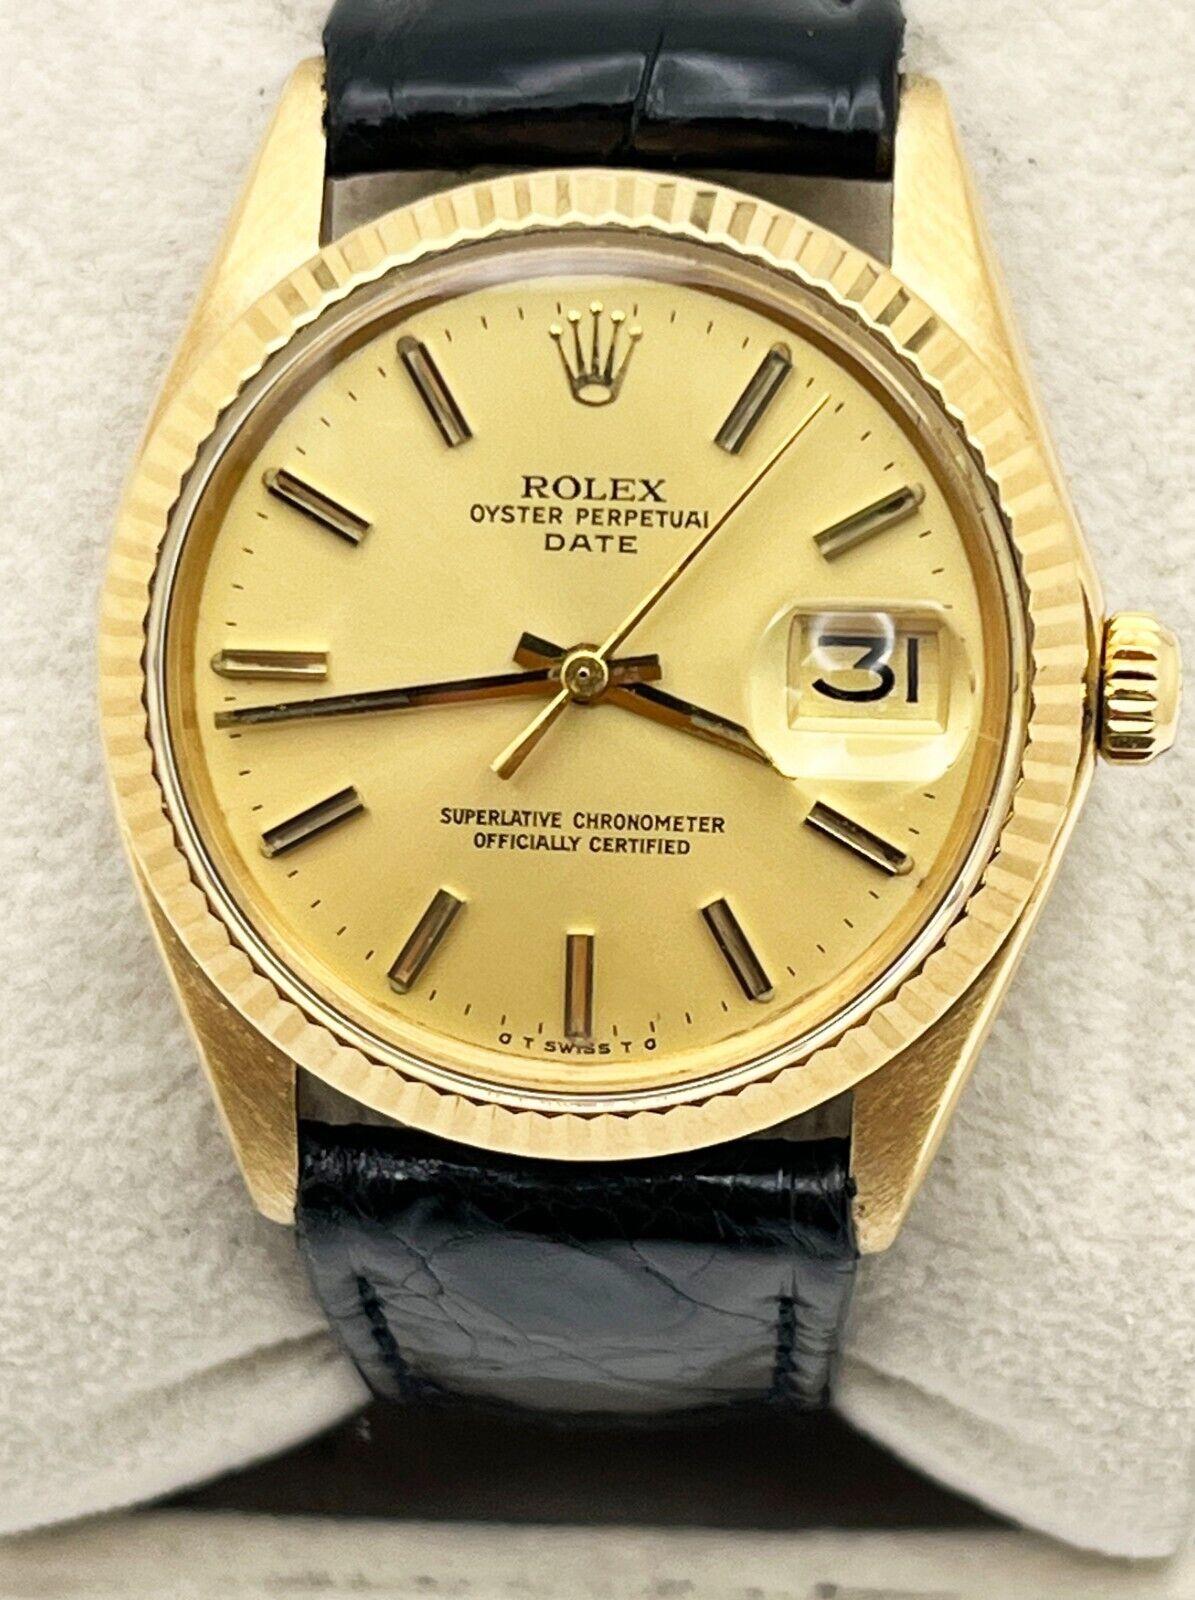 Rolex 1503 Oyster Perpetual Date Champagne Dial 18K Yellow Gold Leather Strap In Excellent Condition For Sale In San Diego, CA